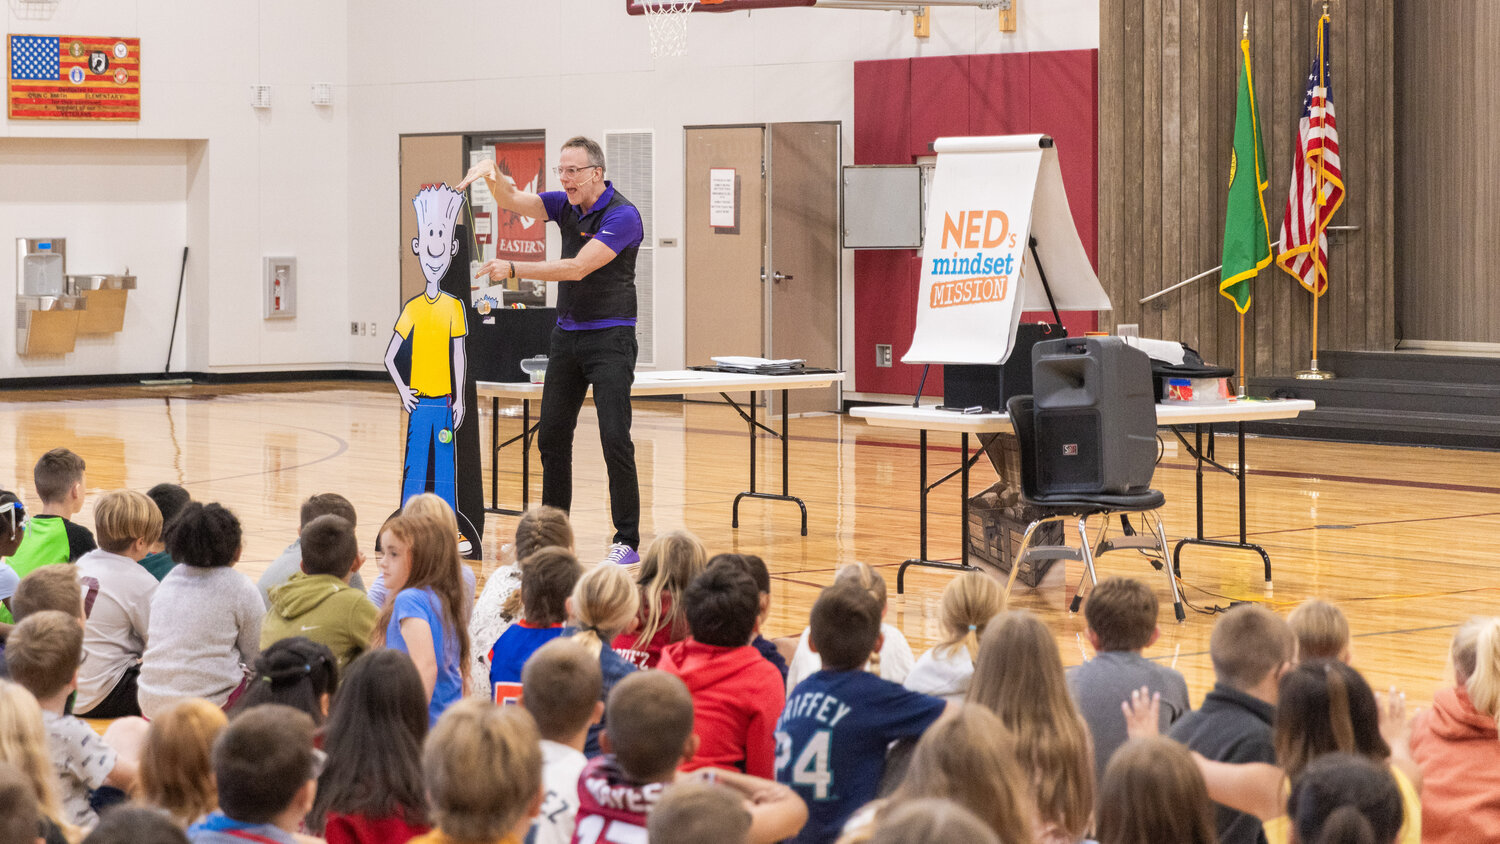 Students watch Paul, a professional yo-yo player, at Orin C. Smith Elementary School in Chehalis on Friday, Sept. 15.